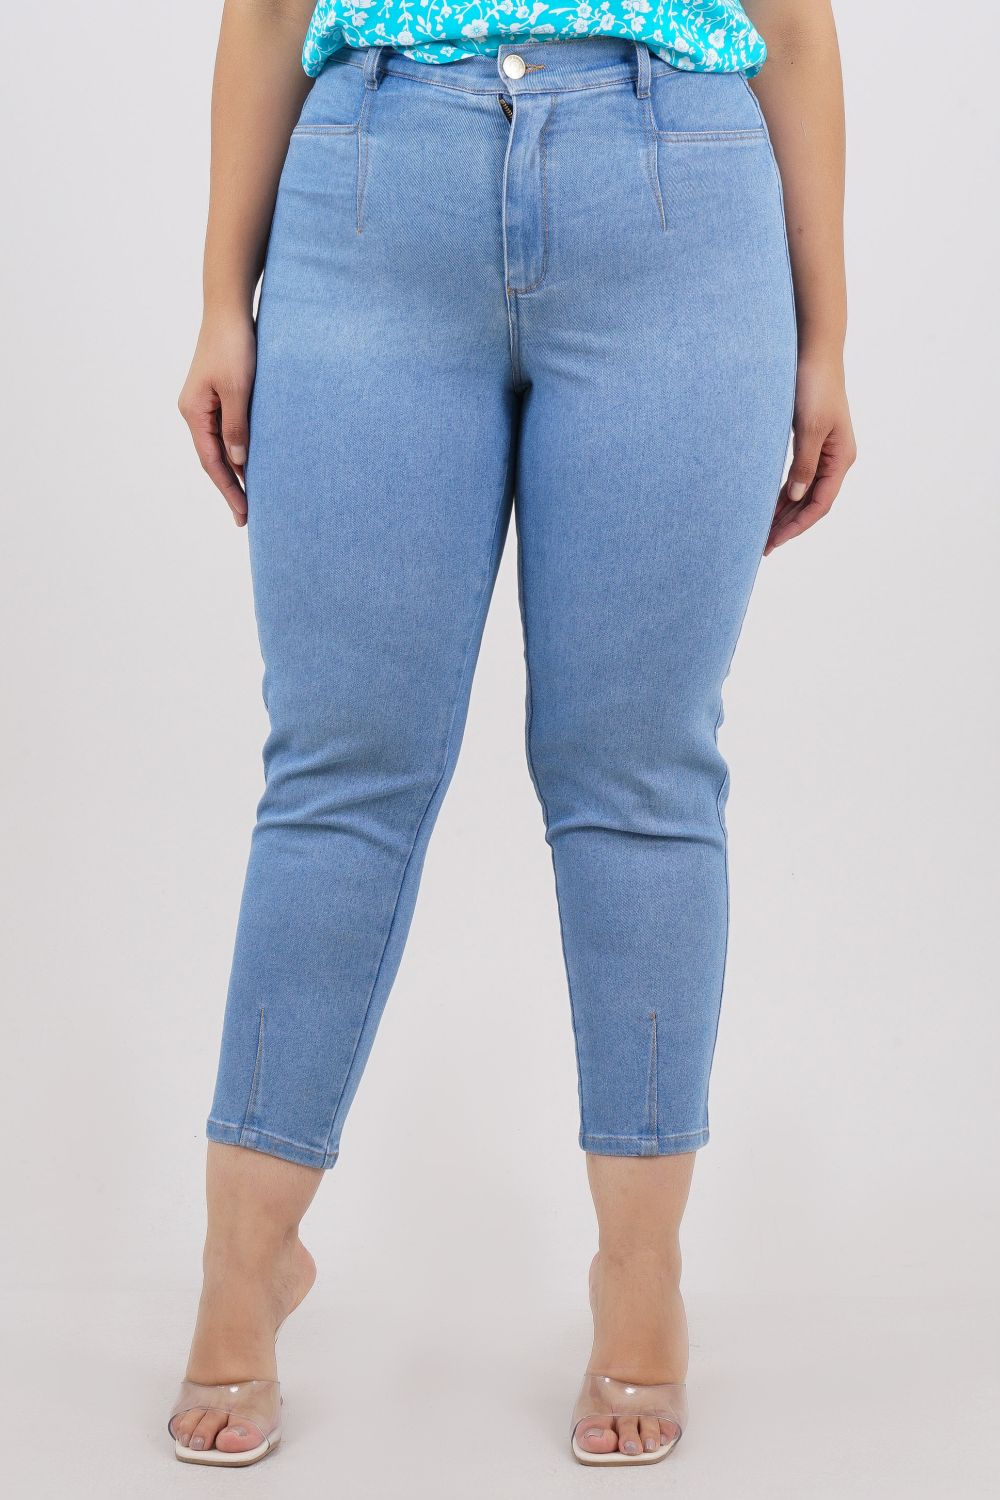 Edie Plus-Size Mom Jeans  Belle and Broome Plus-Size Fashion